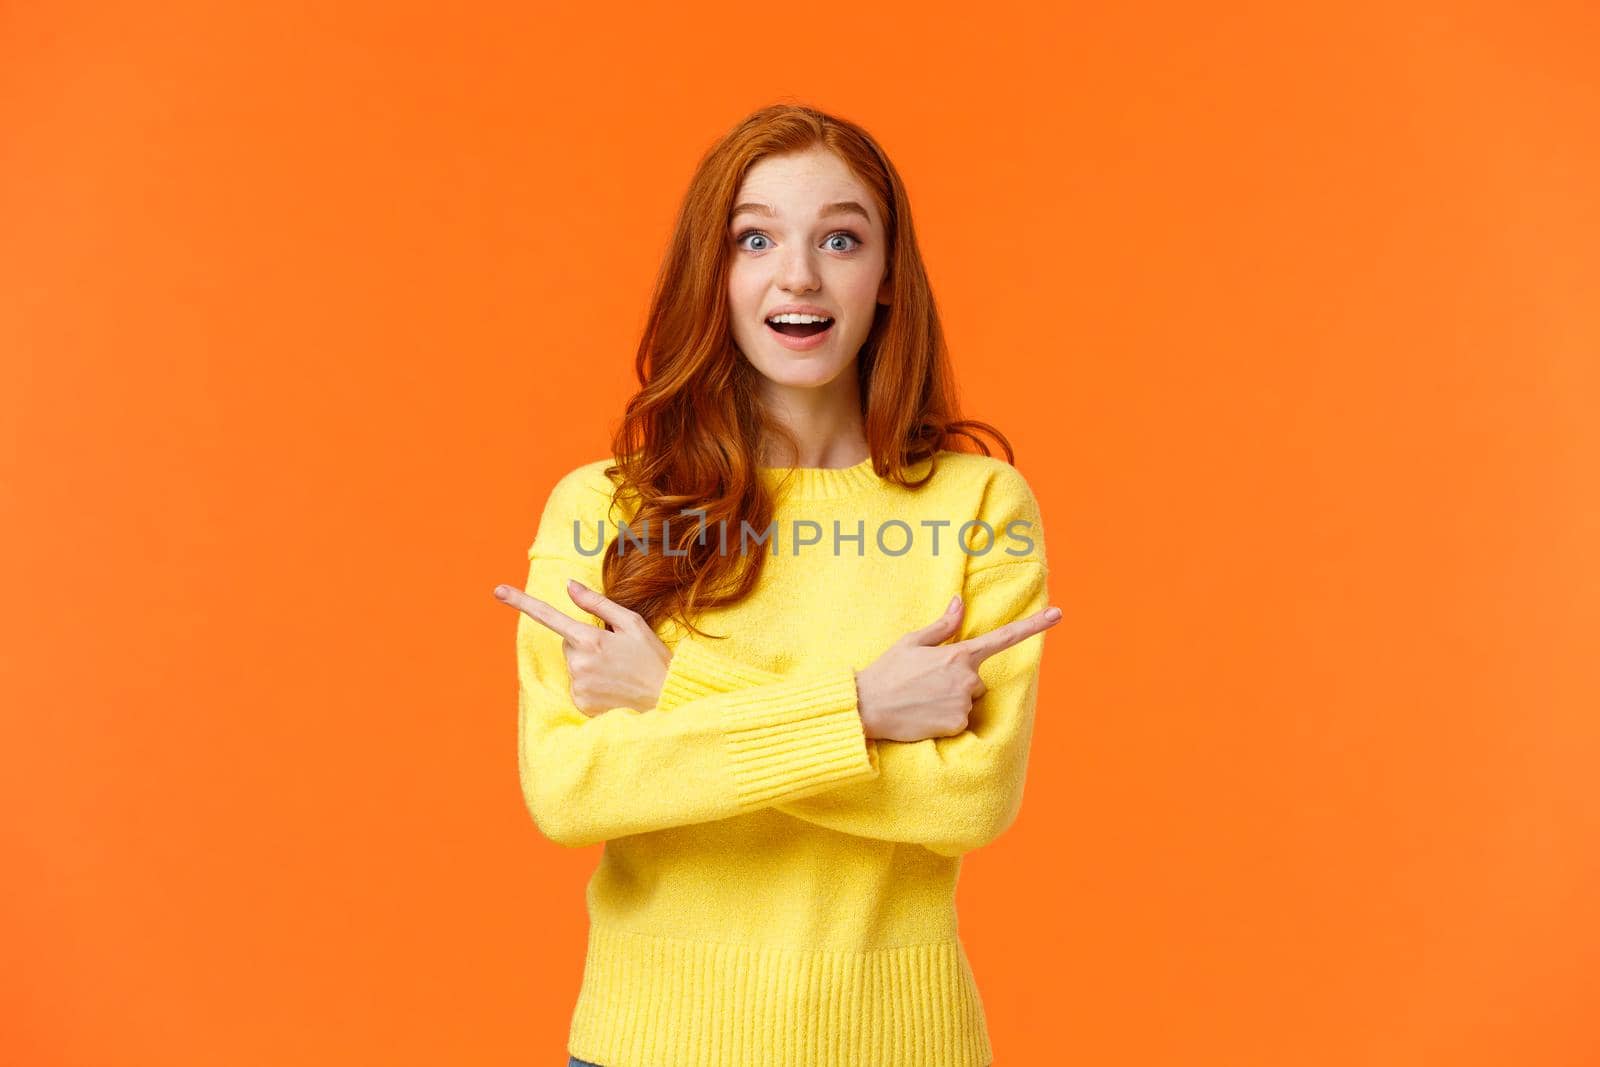 Amused dreamy and cute redhead girl asking advice in shopping mall, buying holiday presents, want valentines day gift, pointing sideways left and right, smiling upbeat, orange background.